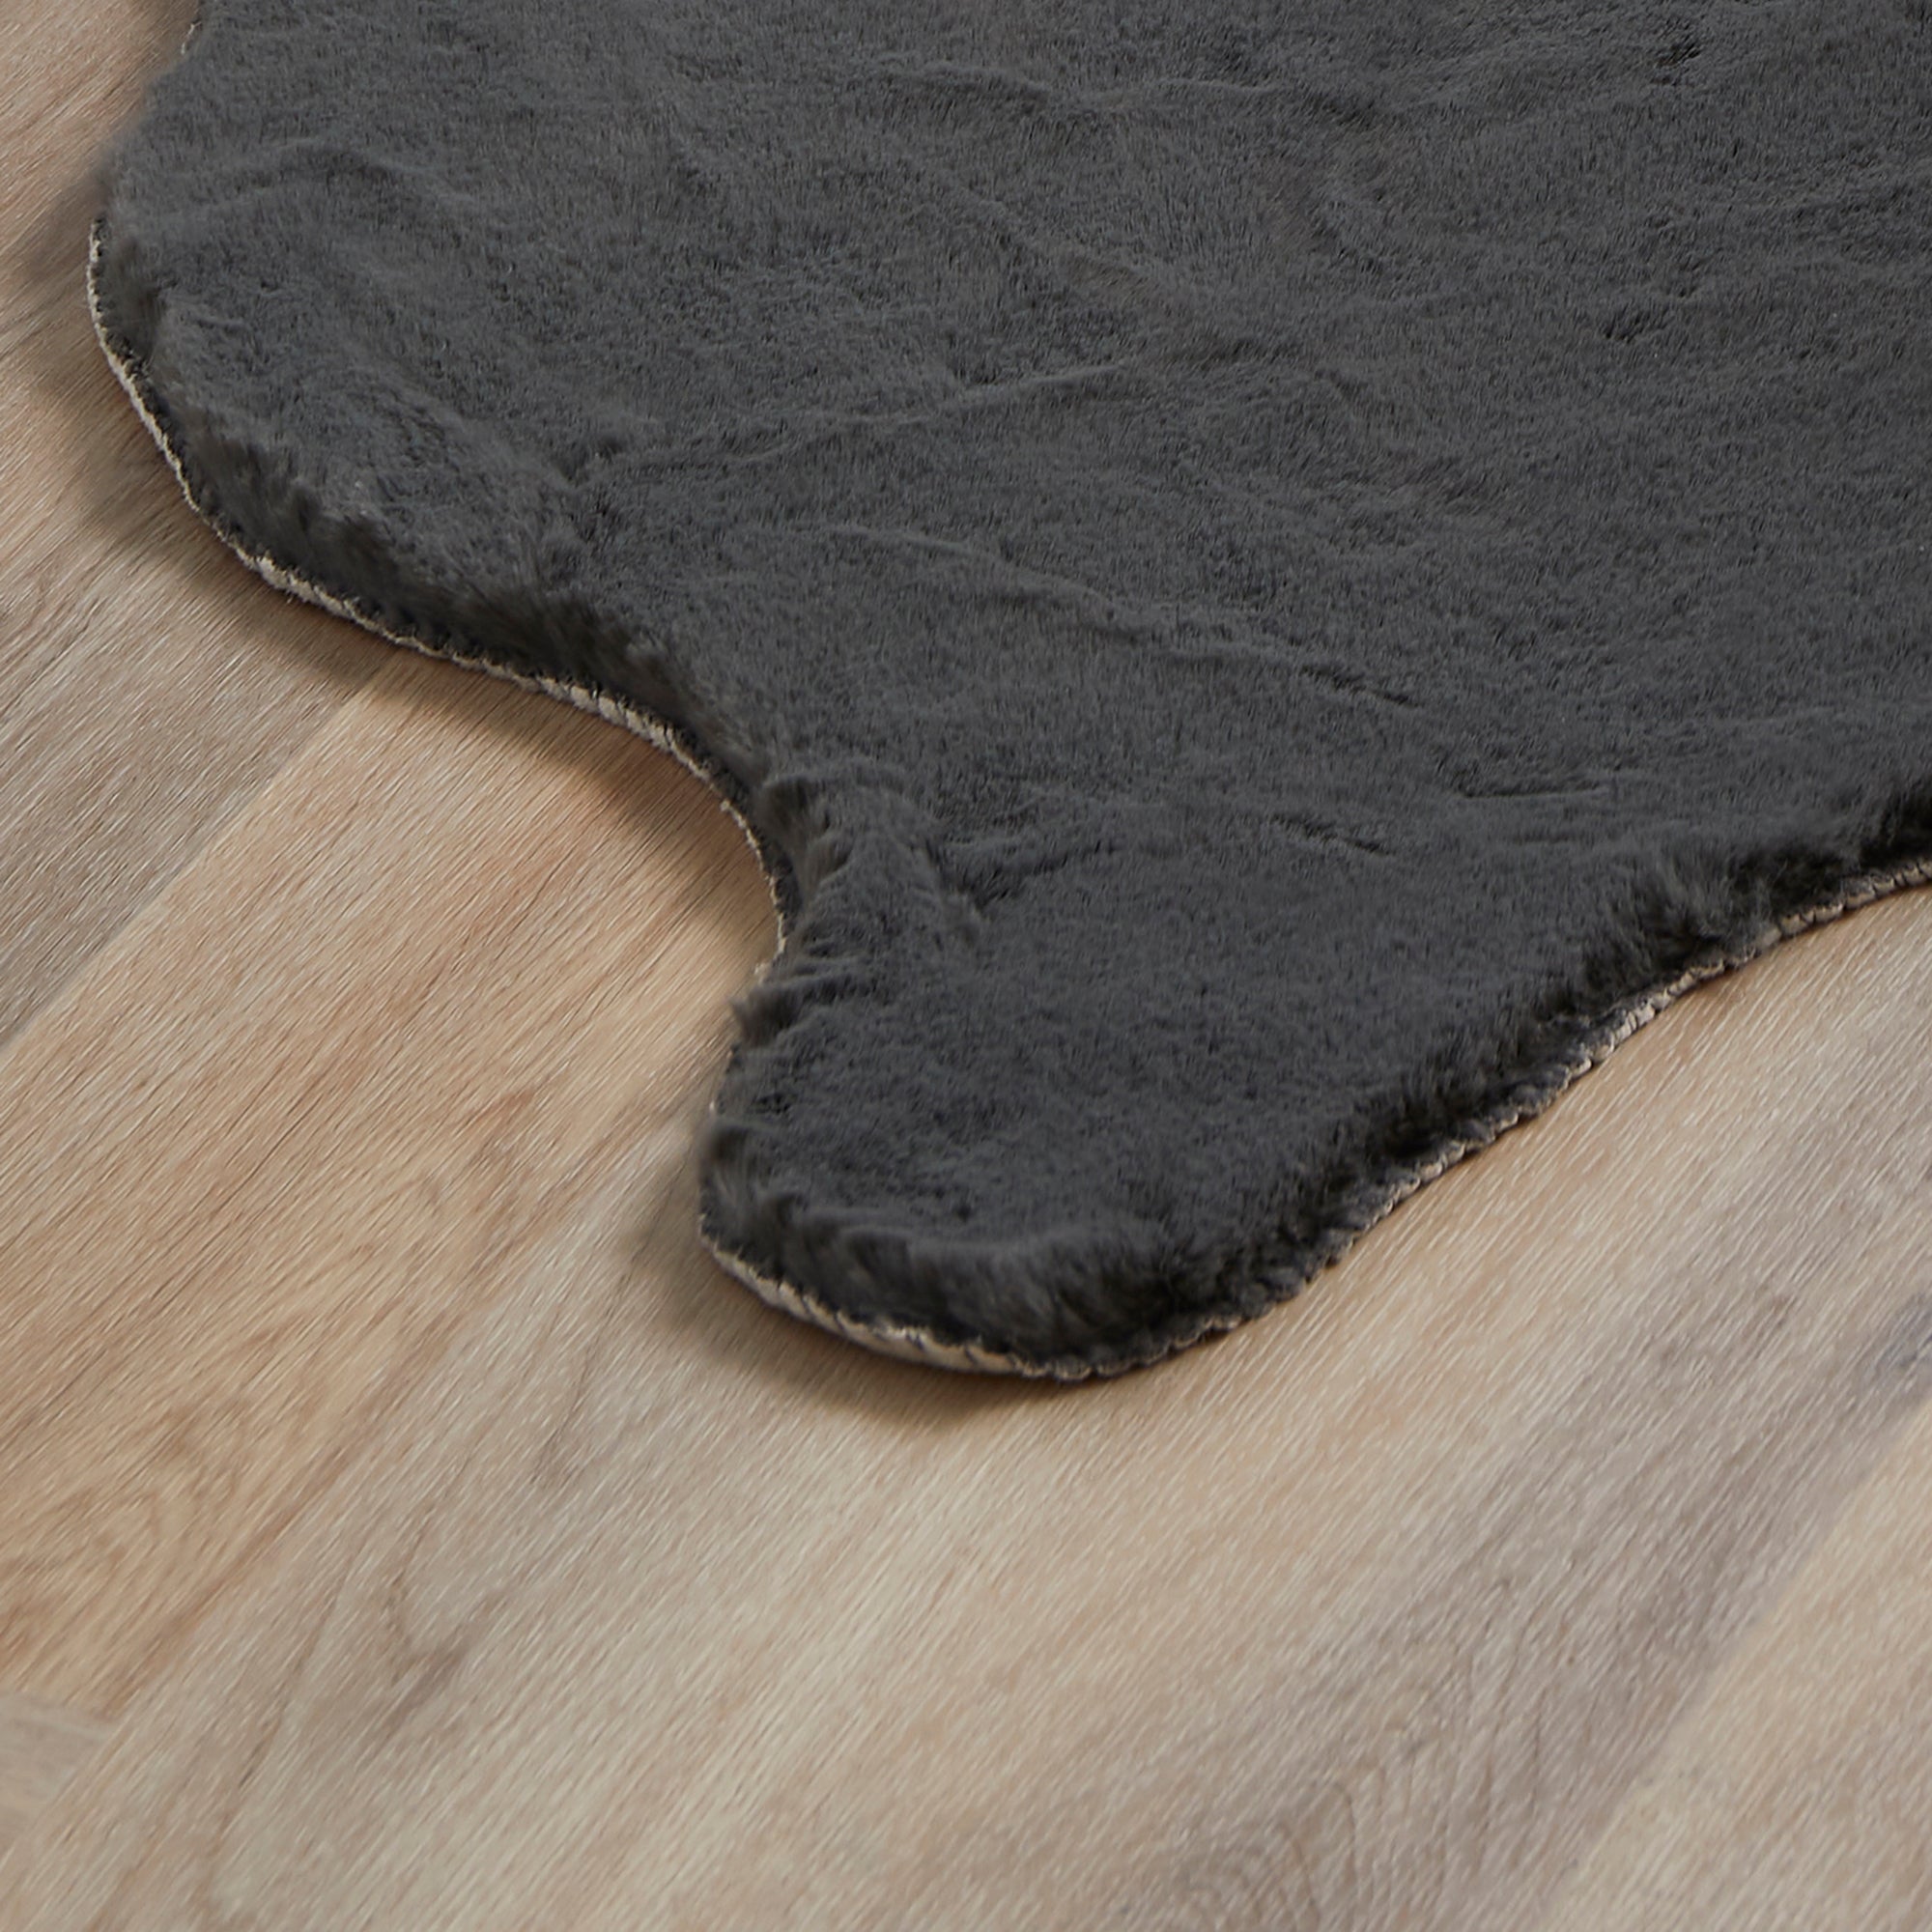 Shaped Rug - Faux Fur Shaped Rug in Charcoal - by Fusion